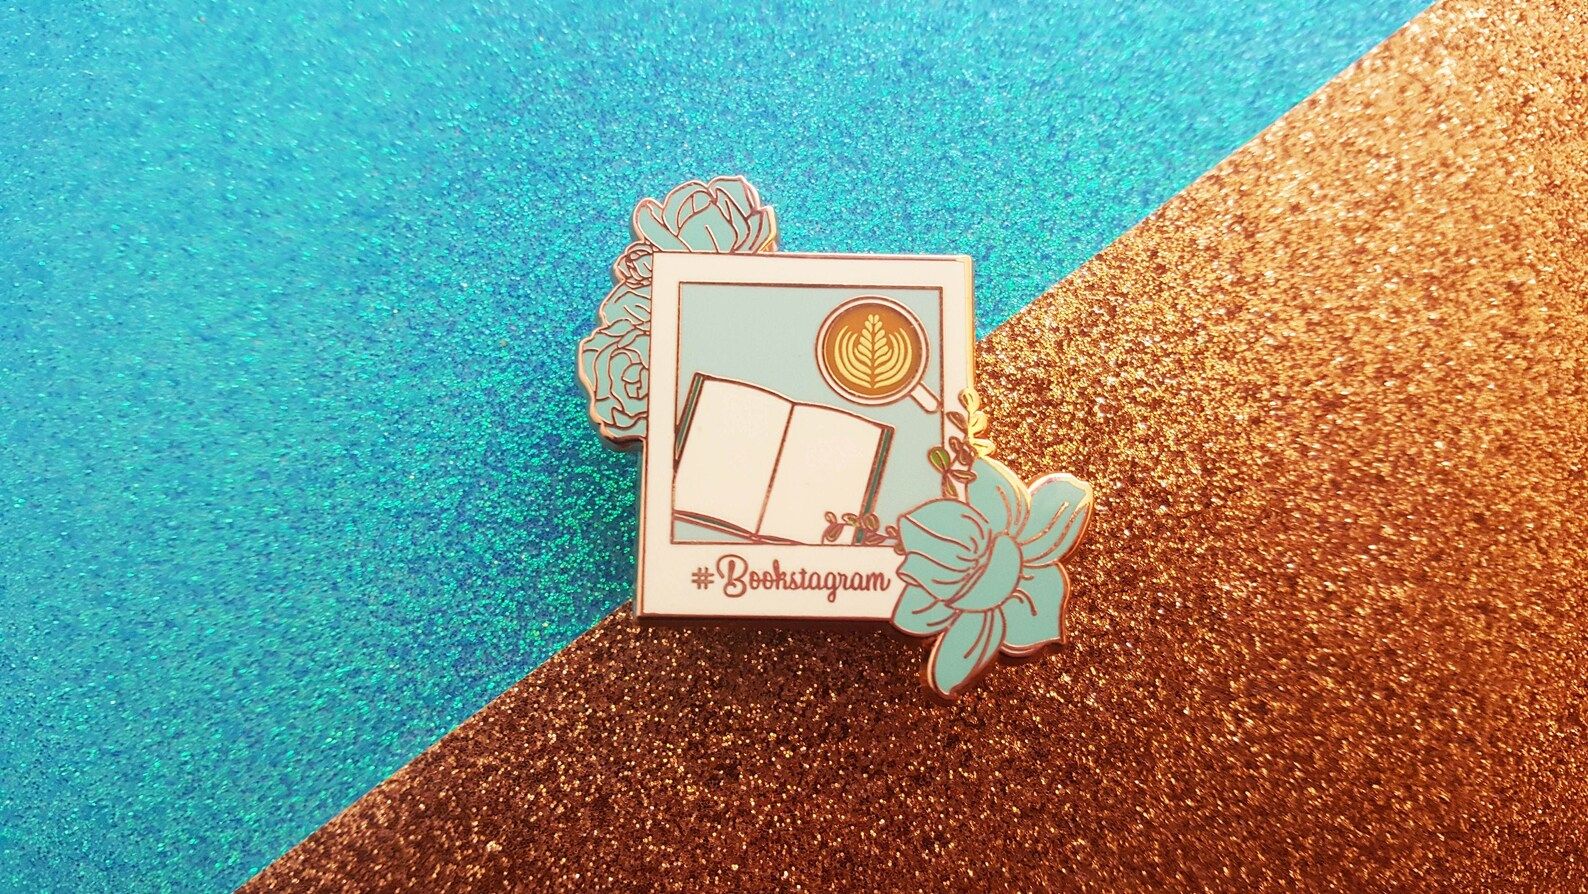 Bookstagram pin from Etsy